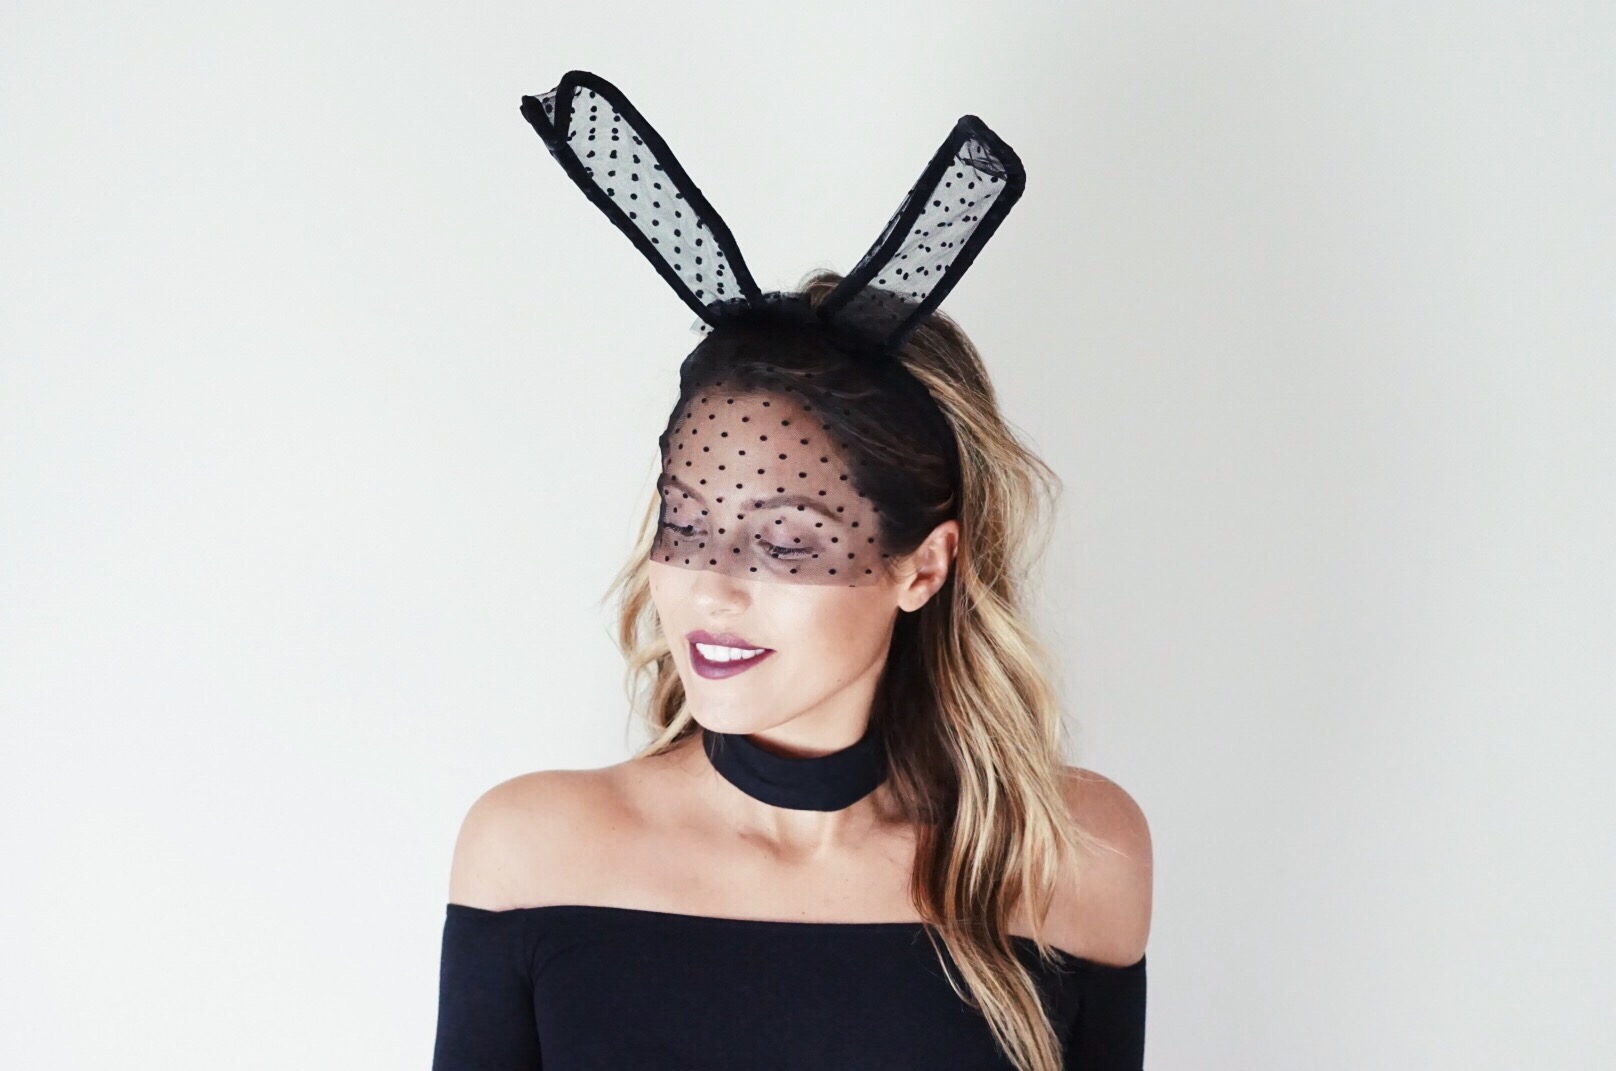 Jenna Boron of Balance and Chaos shares 9 tops and accessories that you need for Halloween if you are an anti-costume type chick like her...